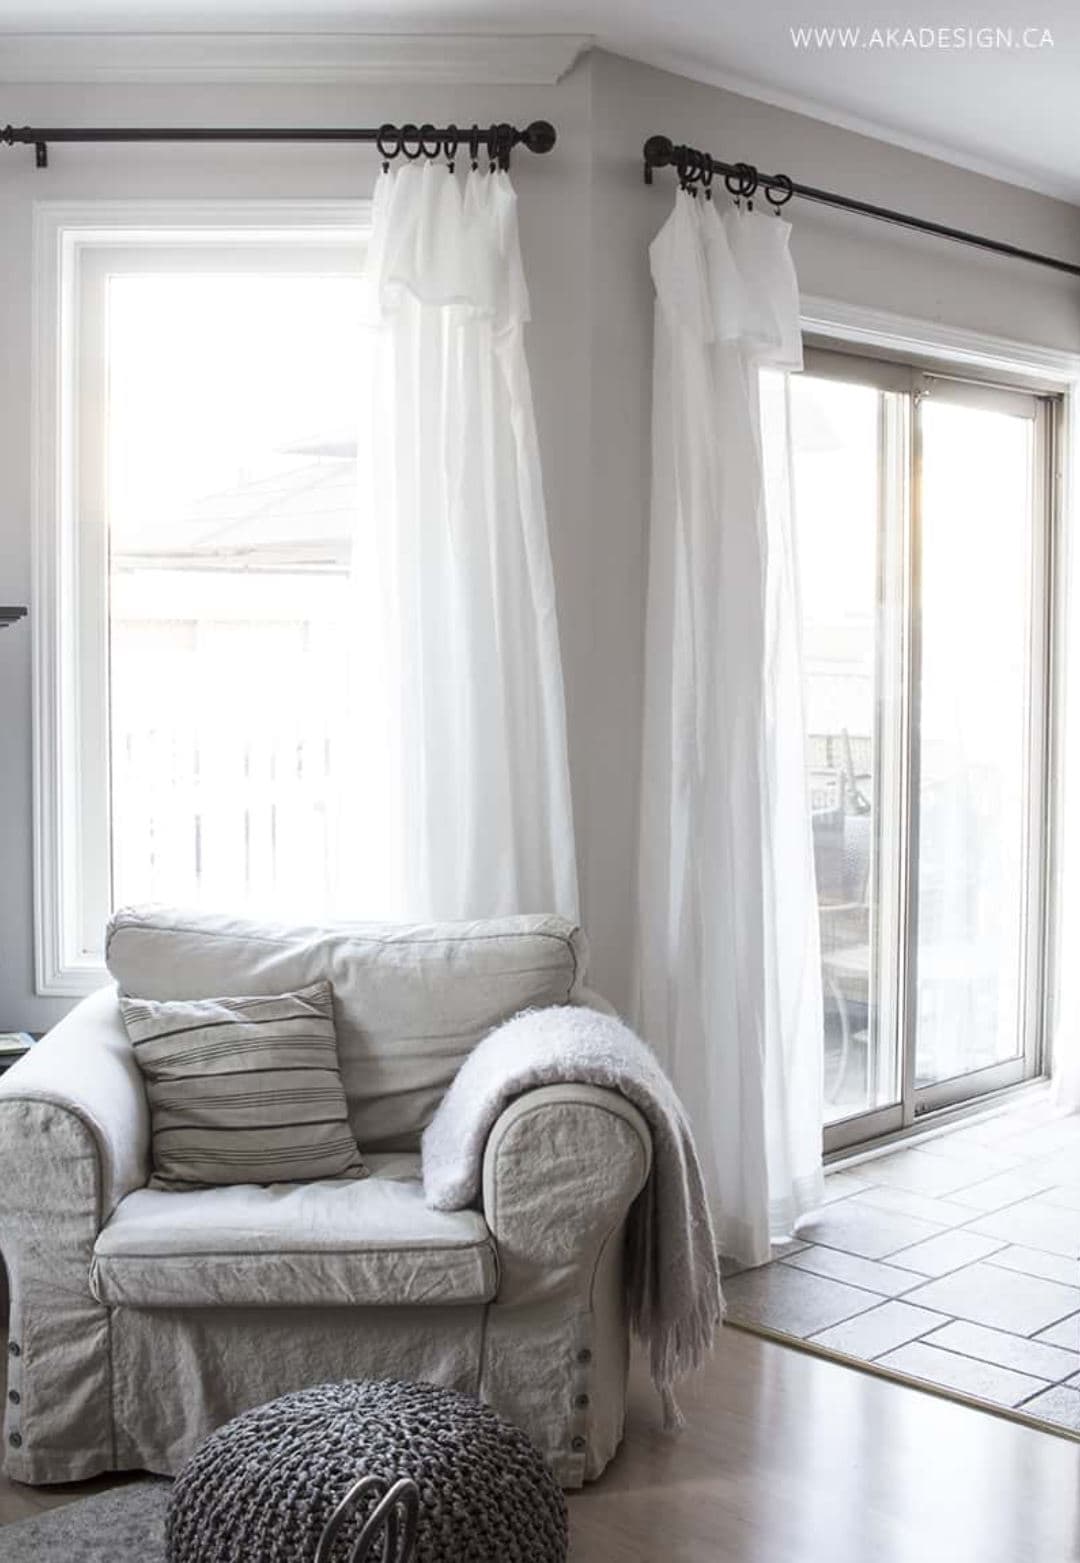 Ruffled white curtains hanging over large windows in a basement with a large gray armchair in front.